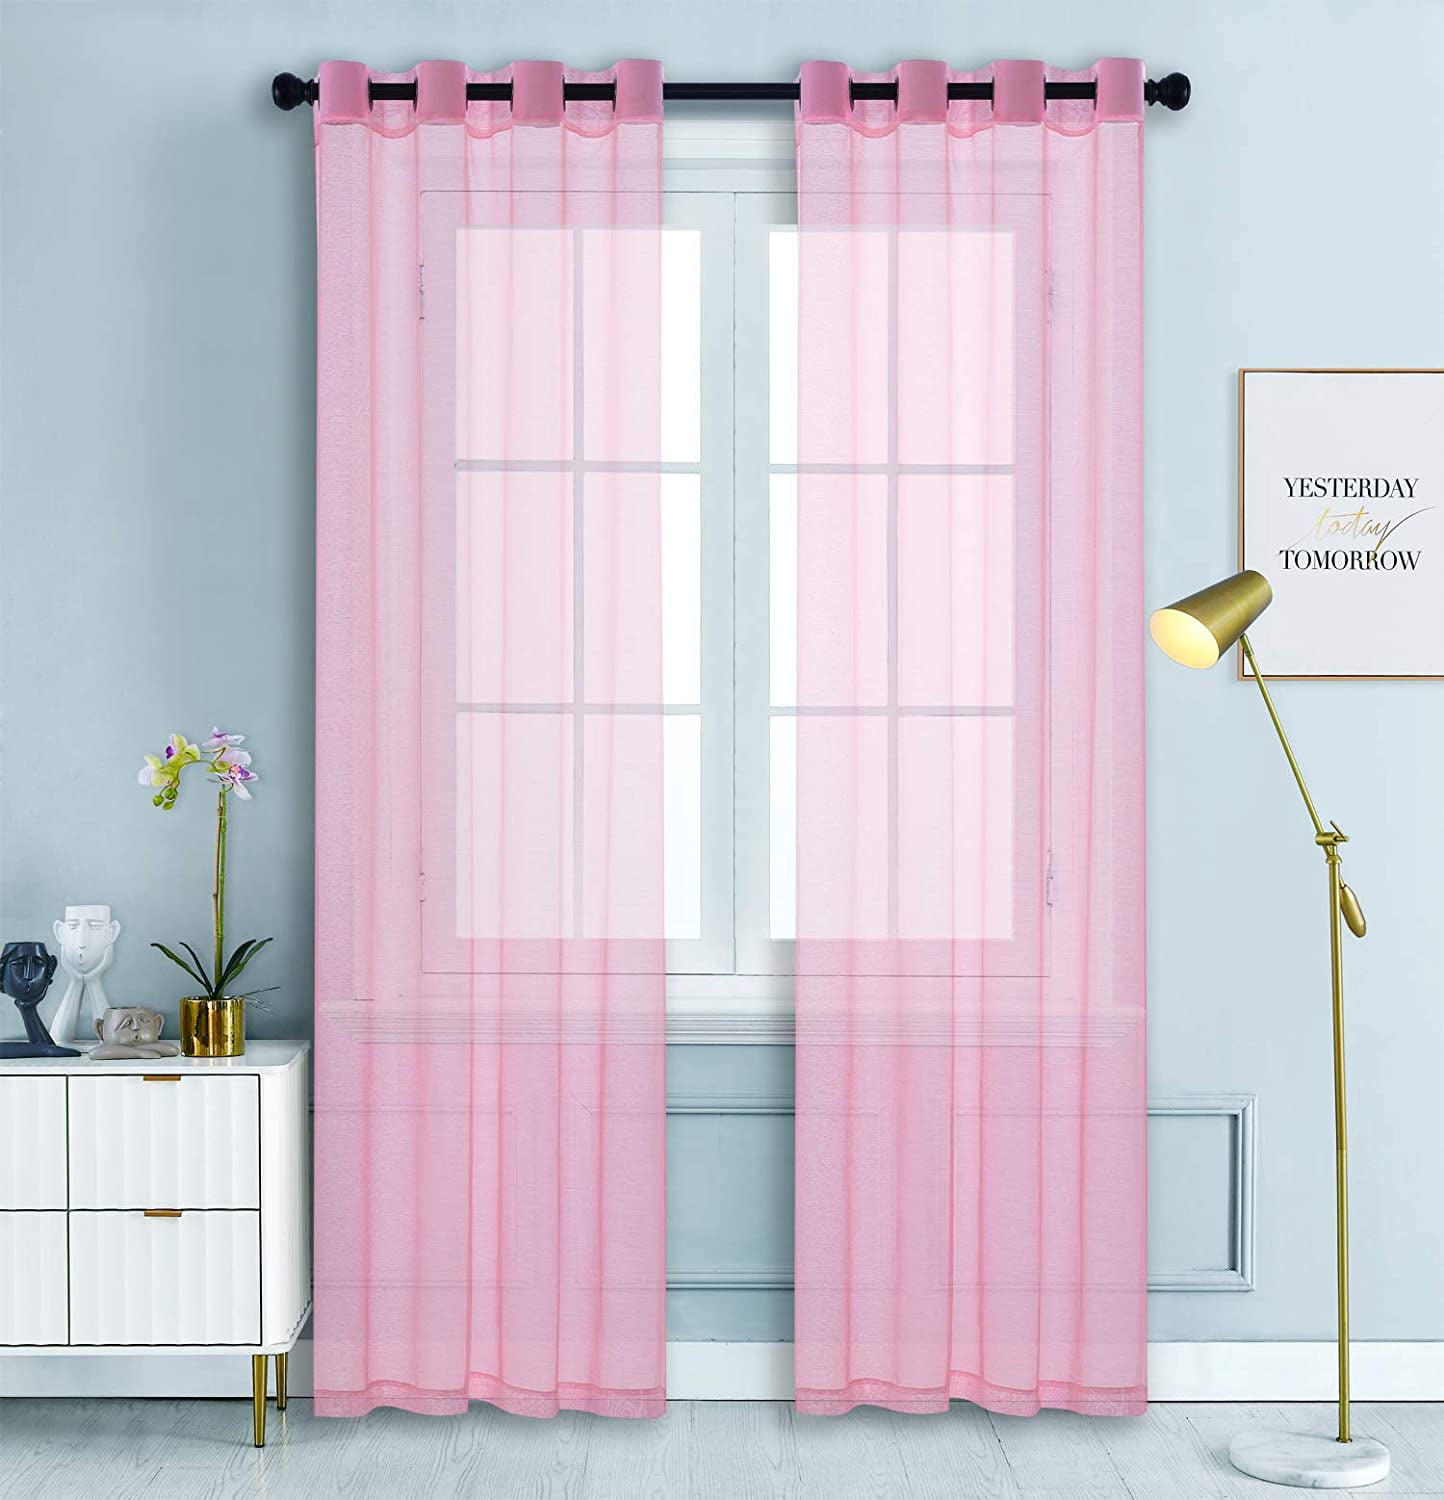 CHIC 1PC SEMI-SHEER 2 MIX COLOR GROMMET TOP WINDOW CURTAIN PANEL HOT PINK WHITE 